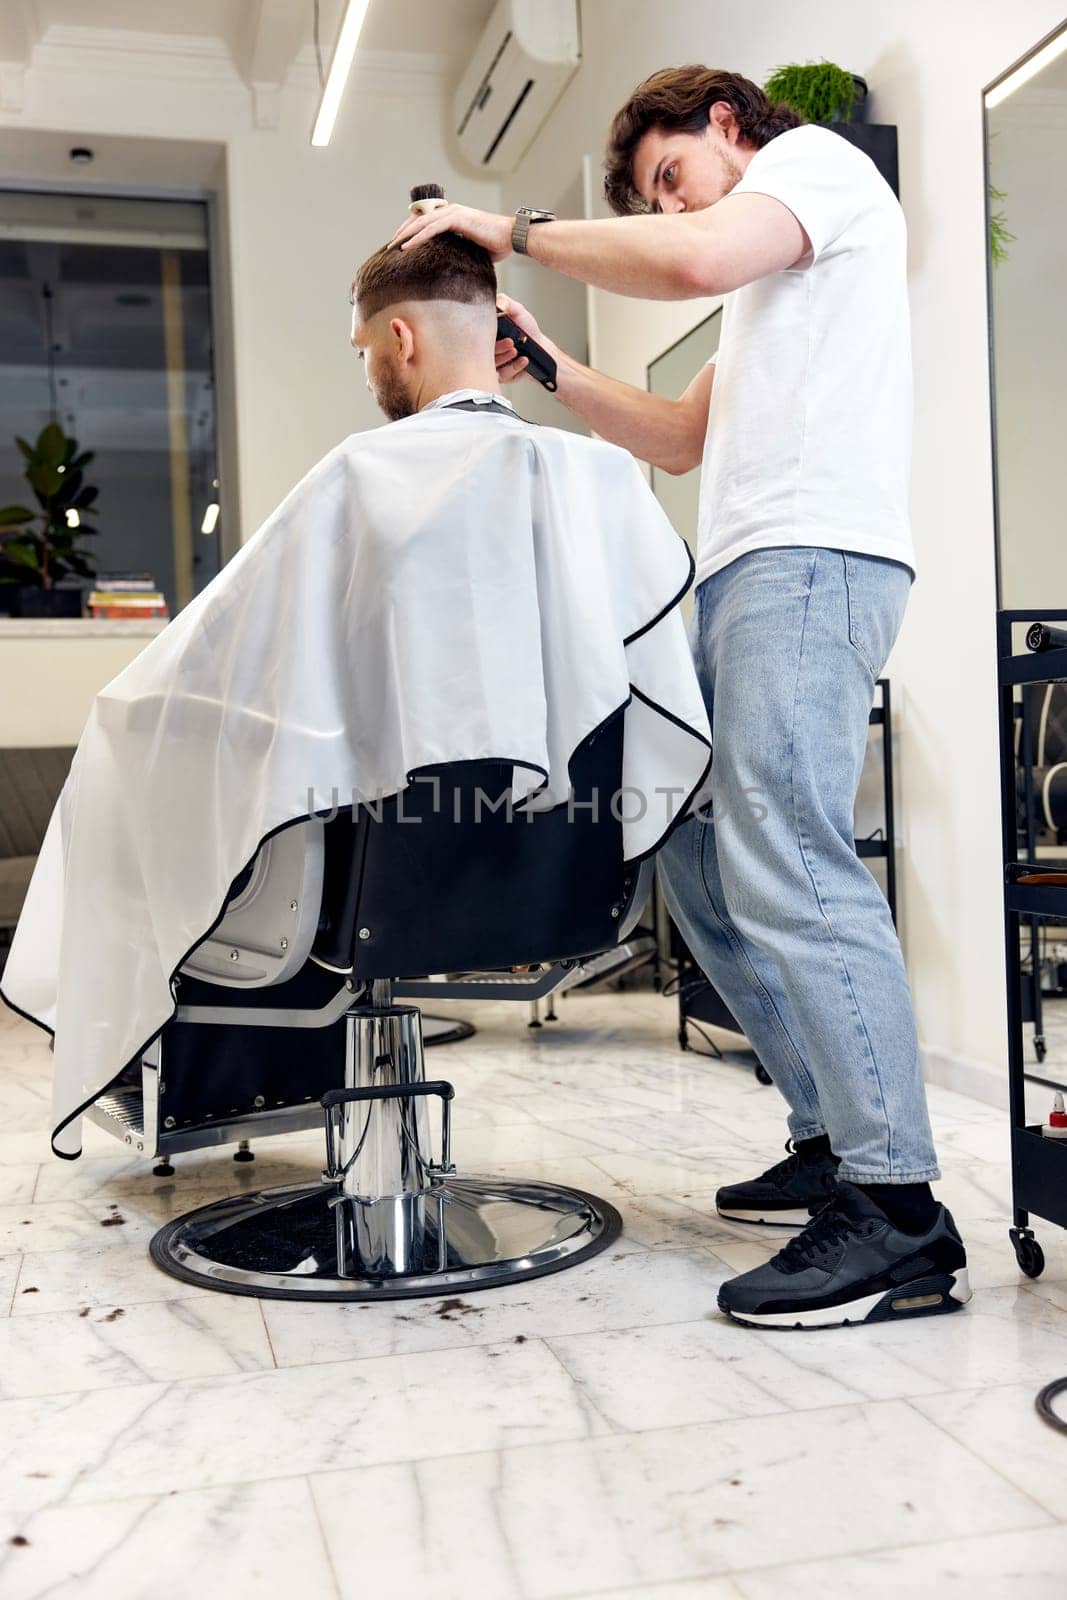 Barber trim hair with clipper on handsome bearded man in barber shop.